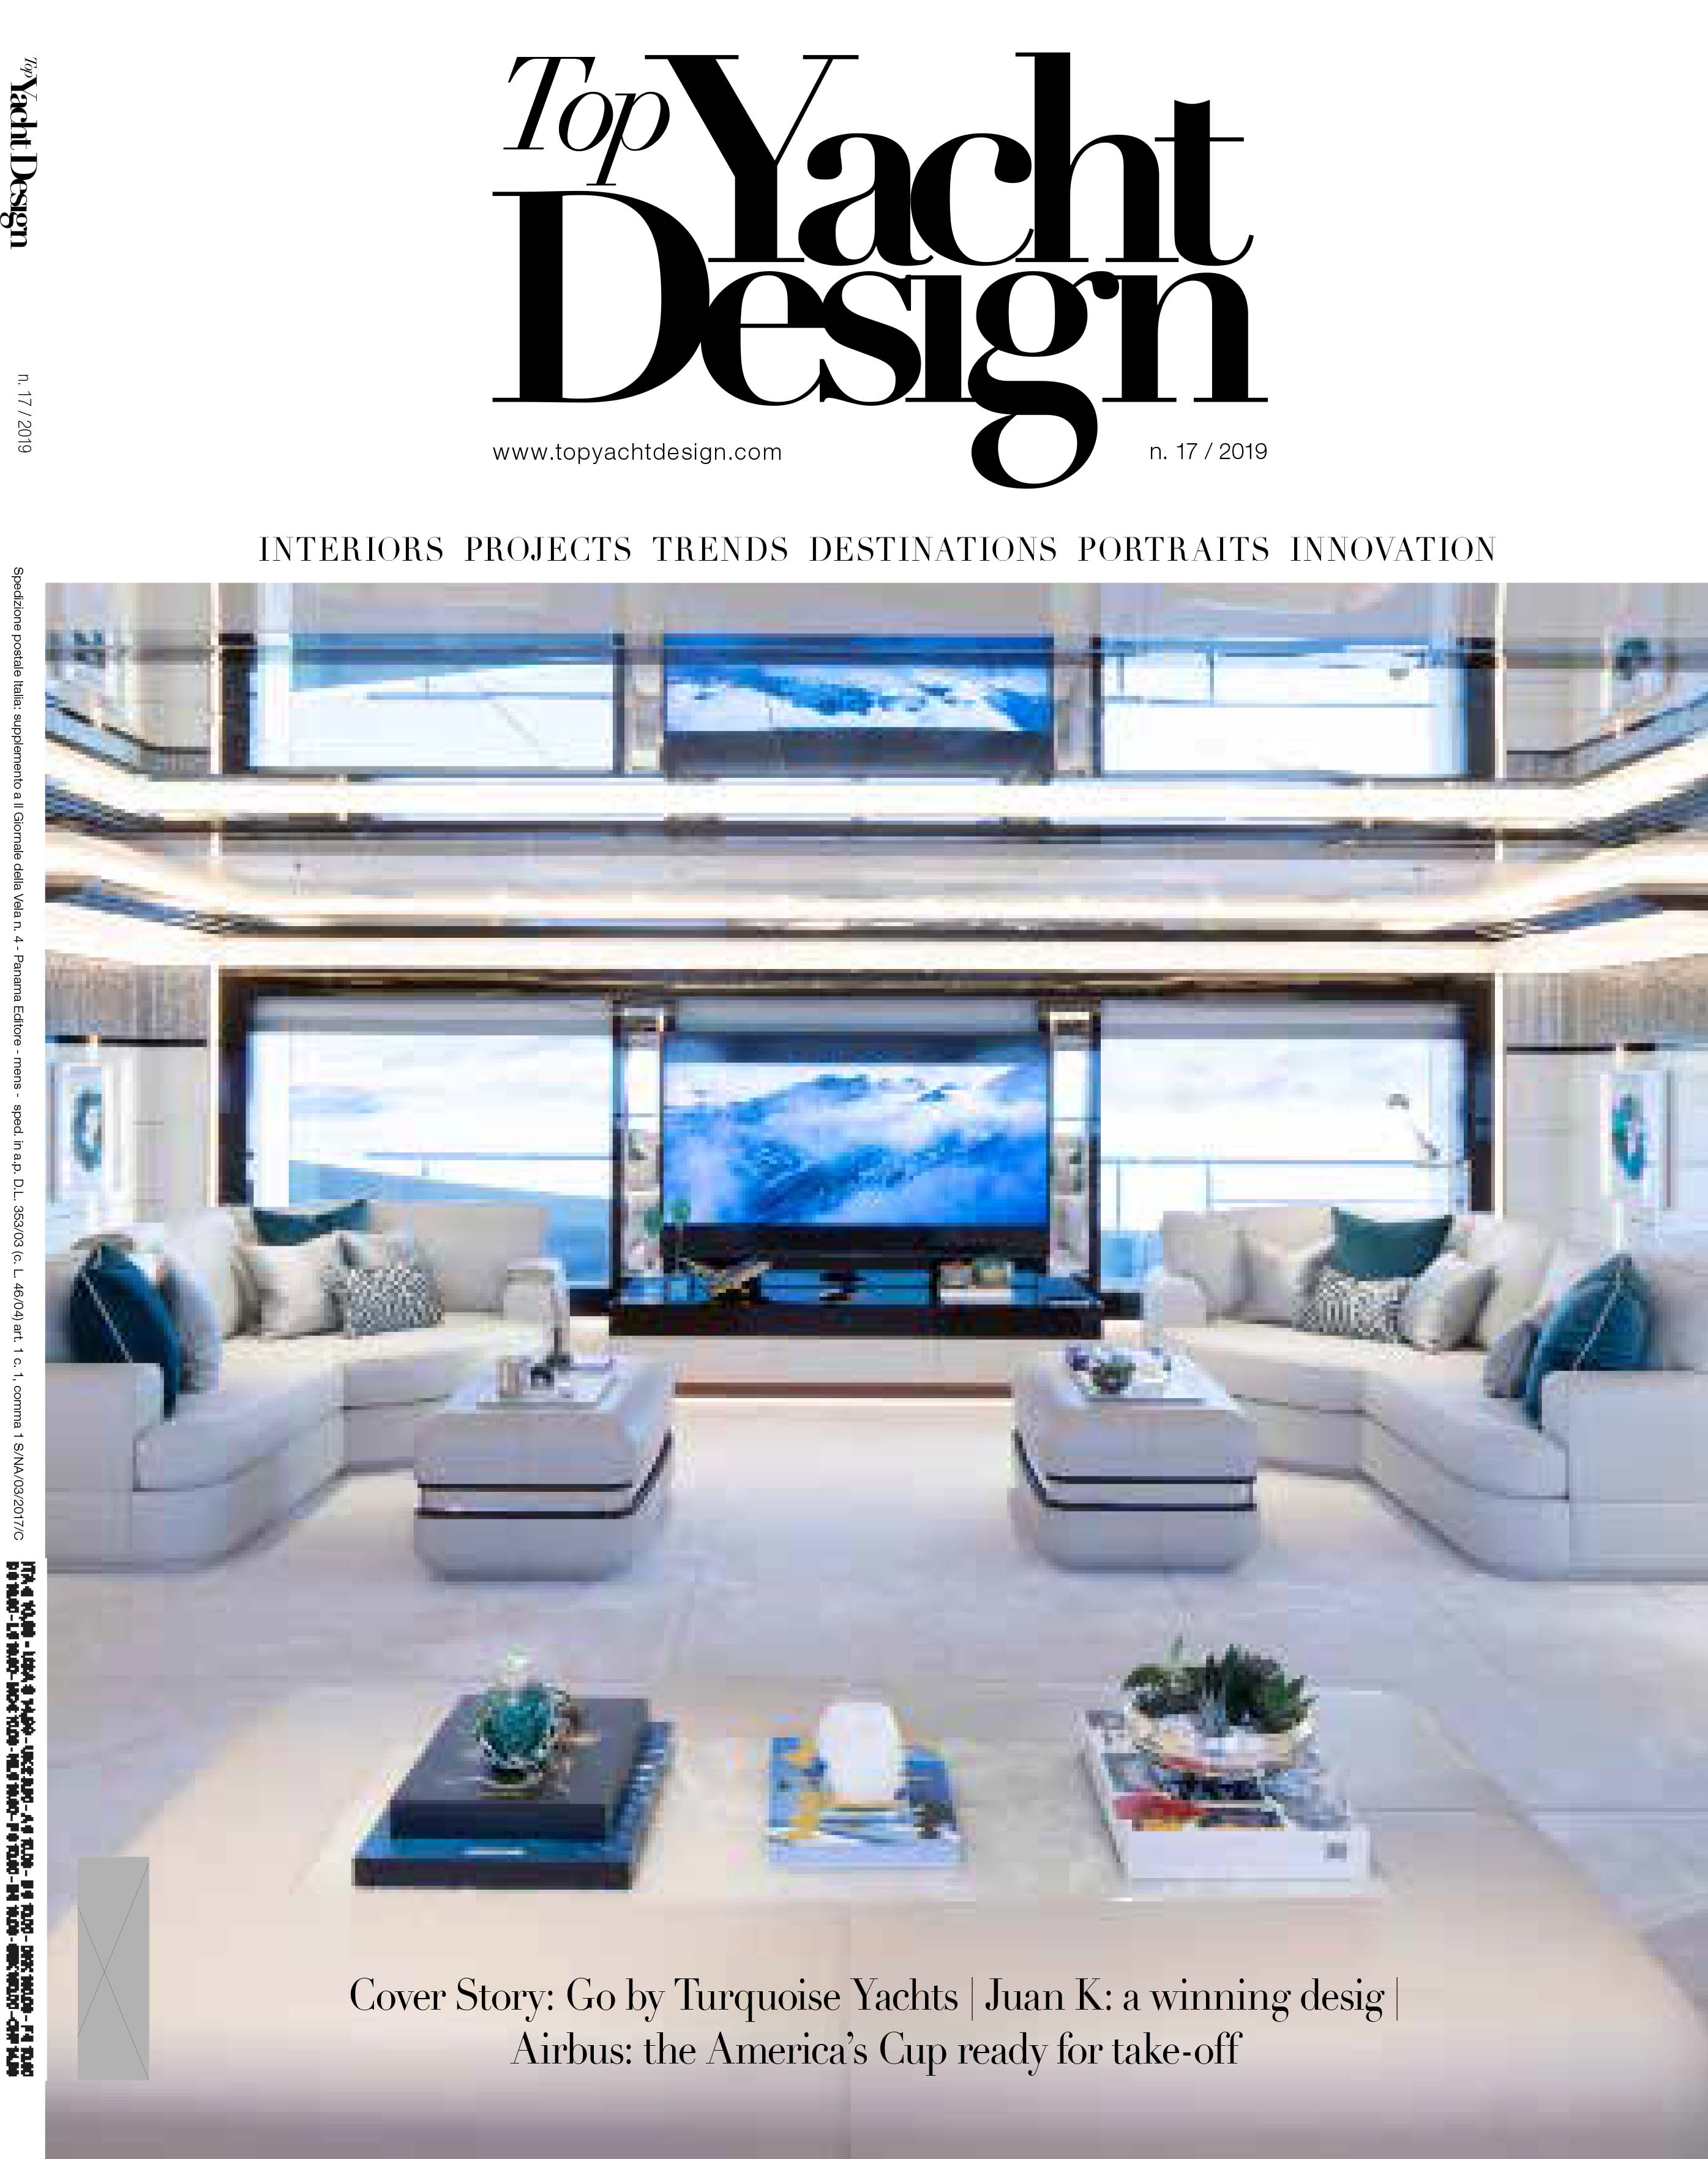 Top Yacht Design, issue 17/2019